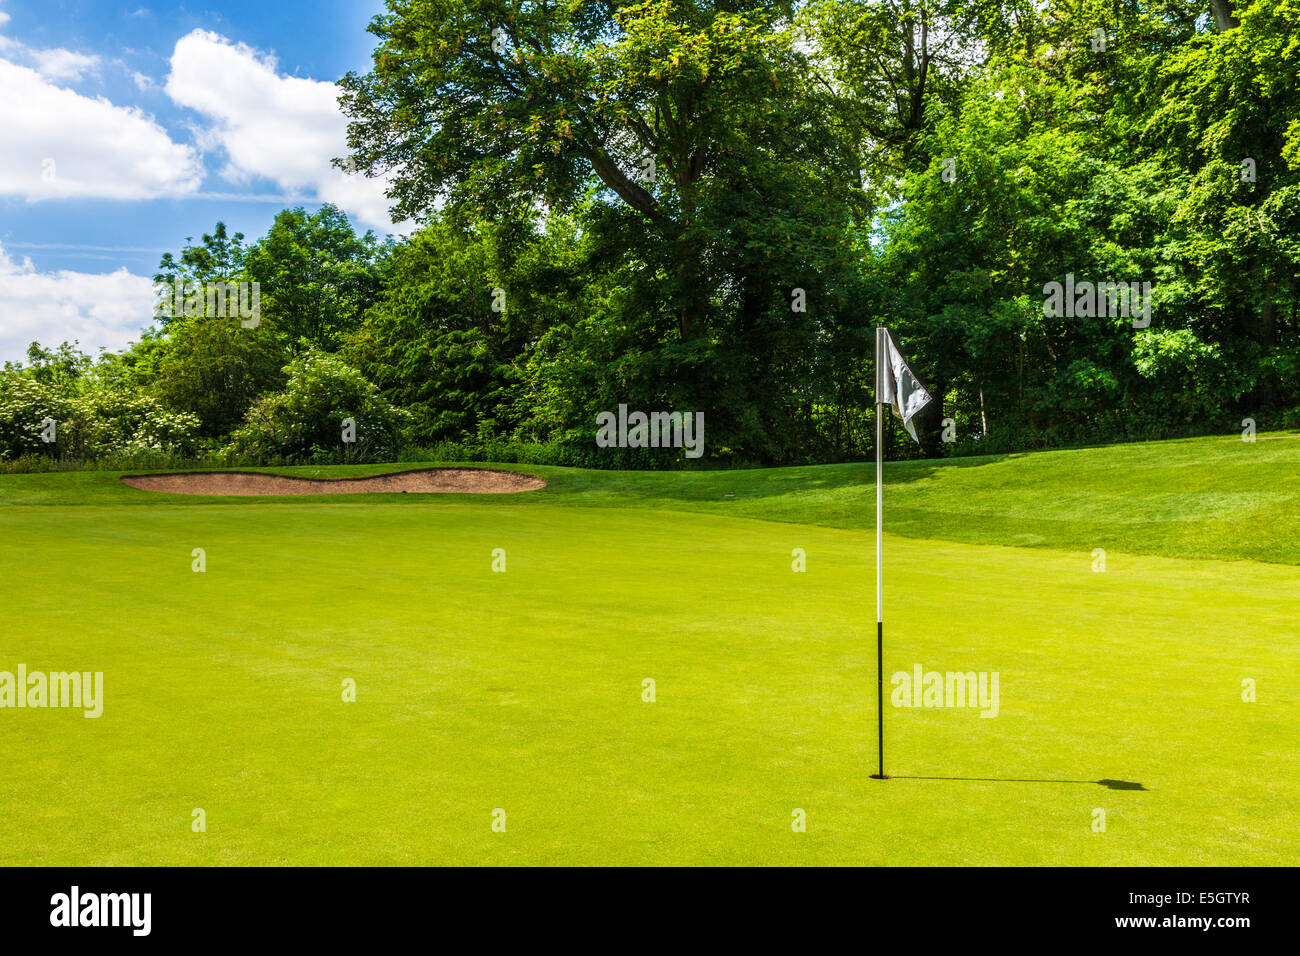 A bunker and putting green with flagstick and hole on a typical golf course. Stock Photo